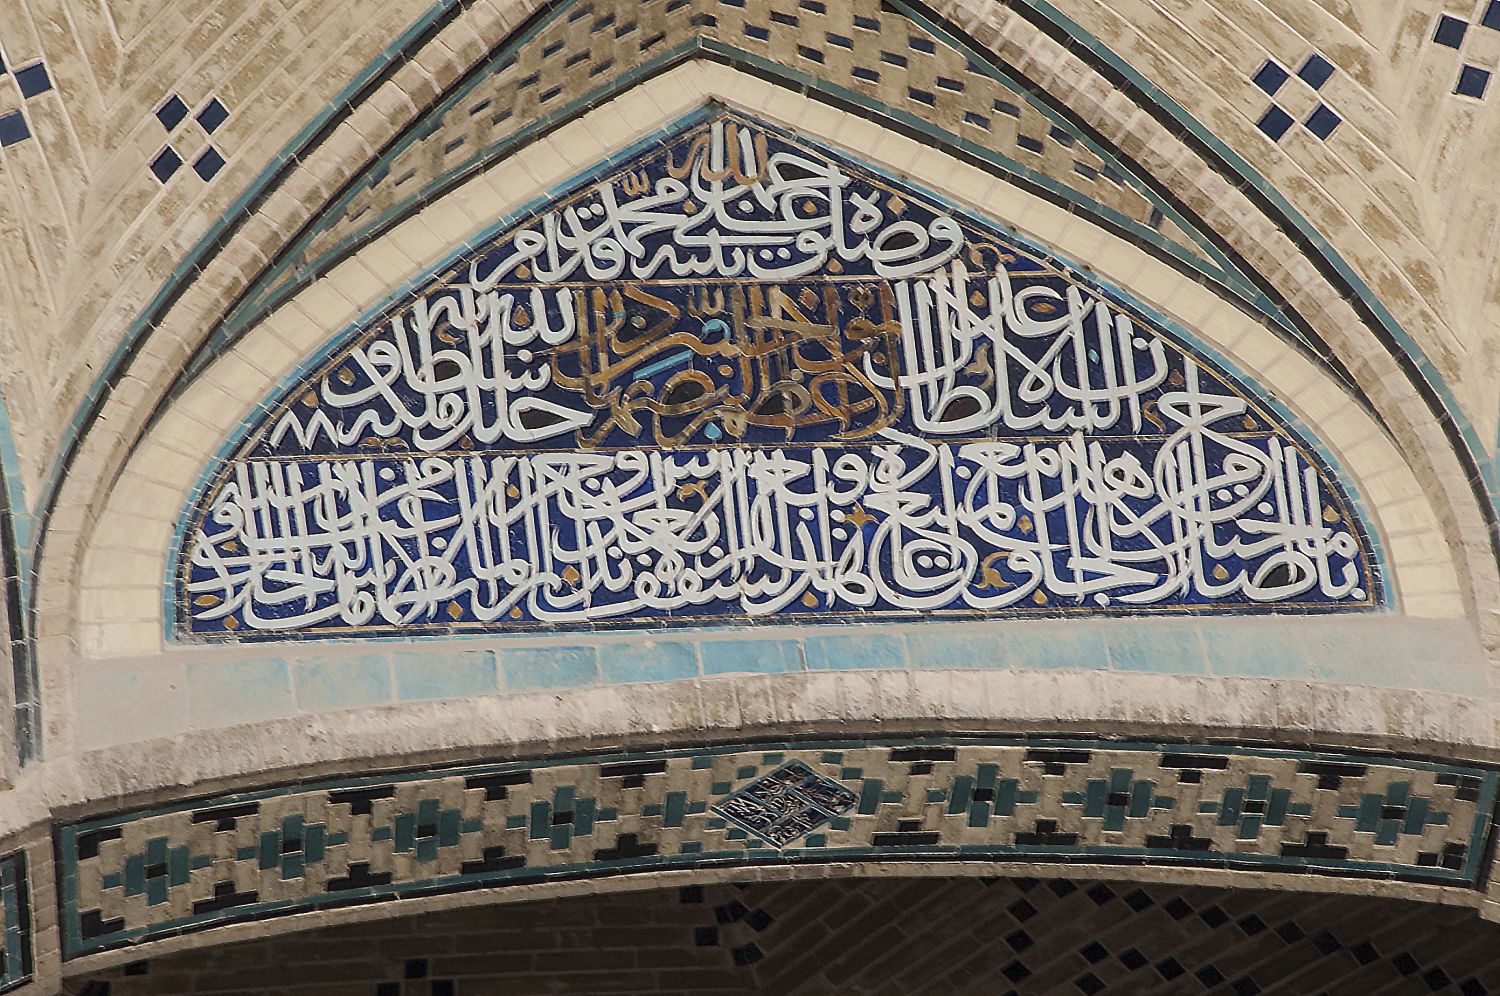 Southwest iwan, detail view of calligraphic panel on muqarnas cell in vault above inner arch.